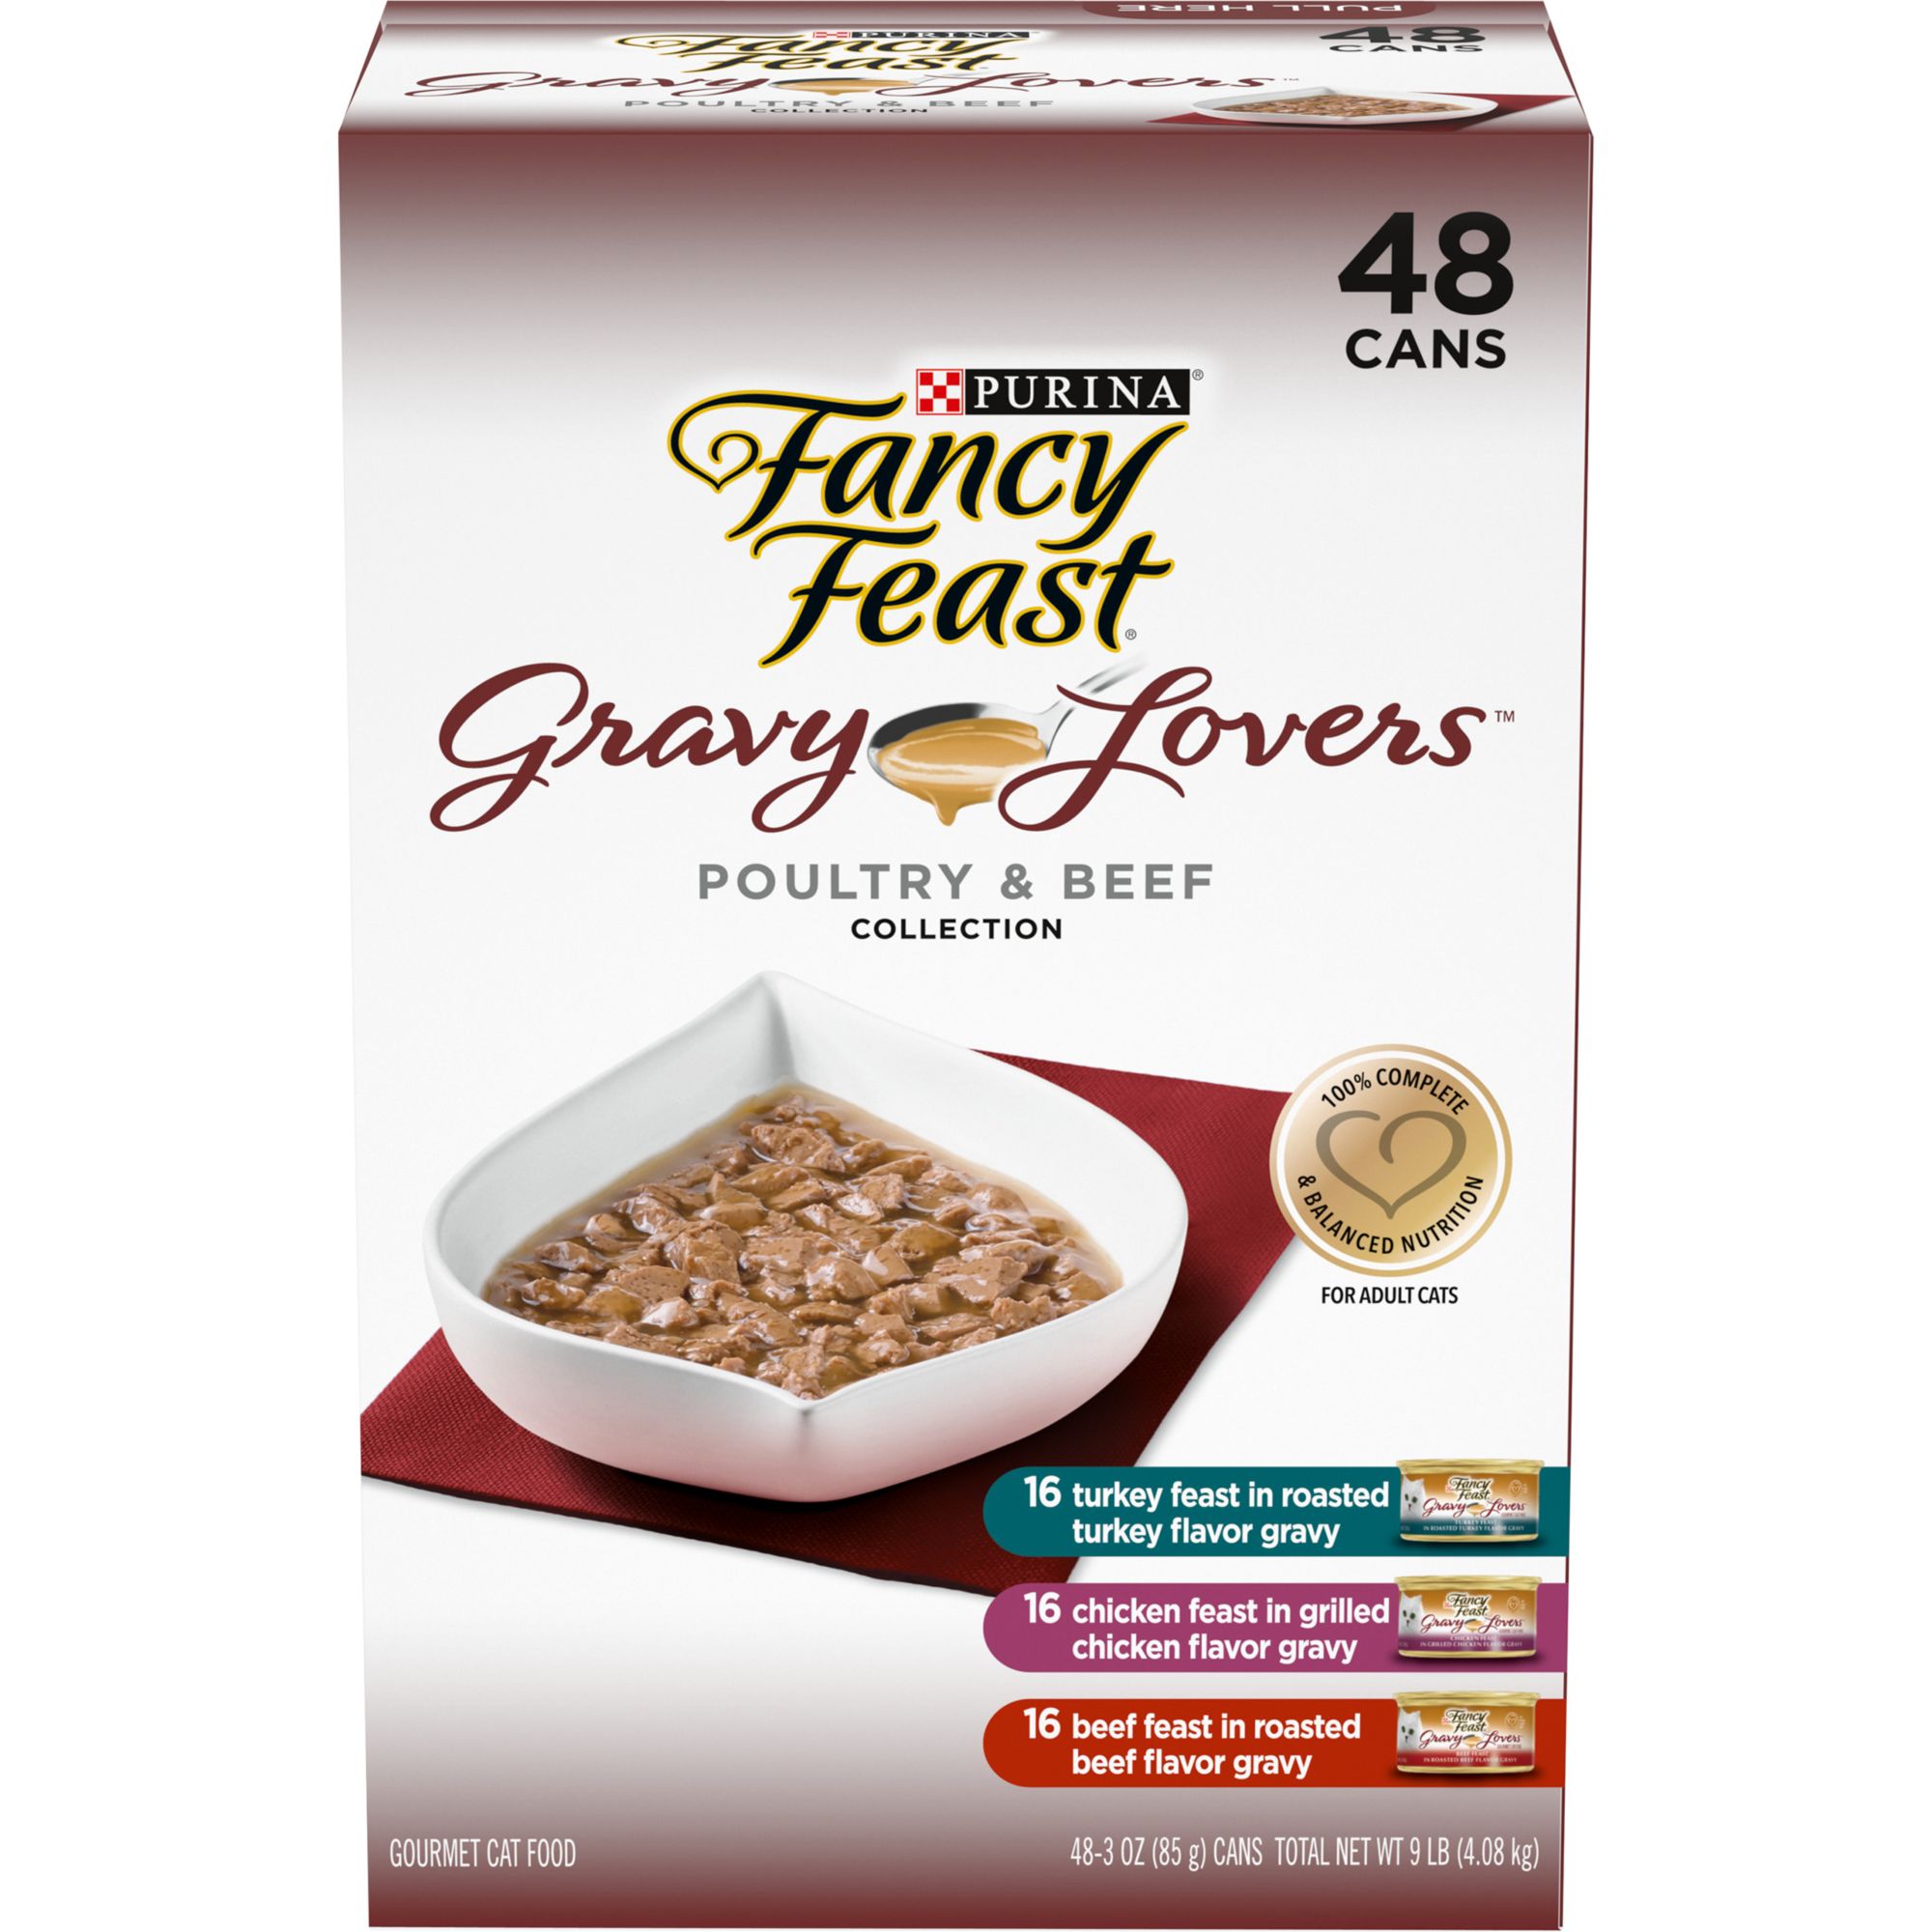 Purina Fancy Feast Gravy Lovers Poultry & Beef Variety Pack, 48 ct.